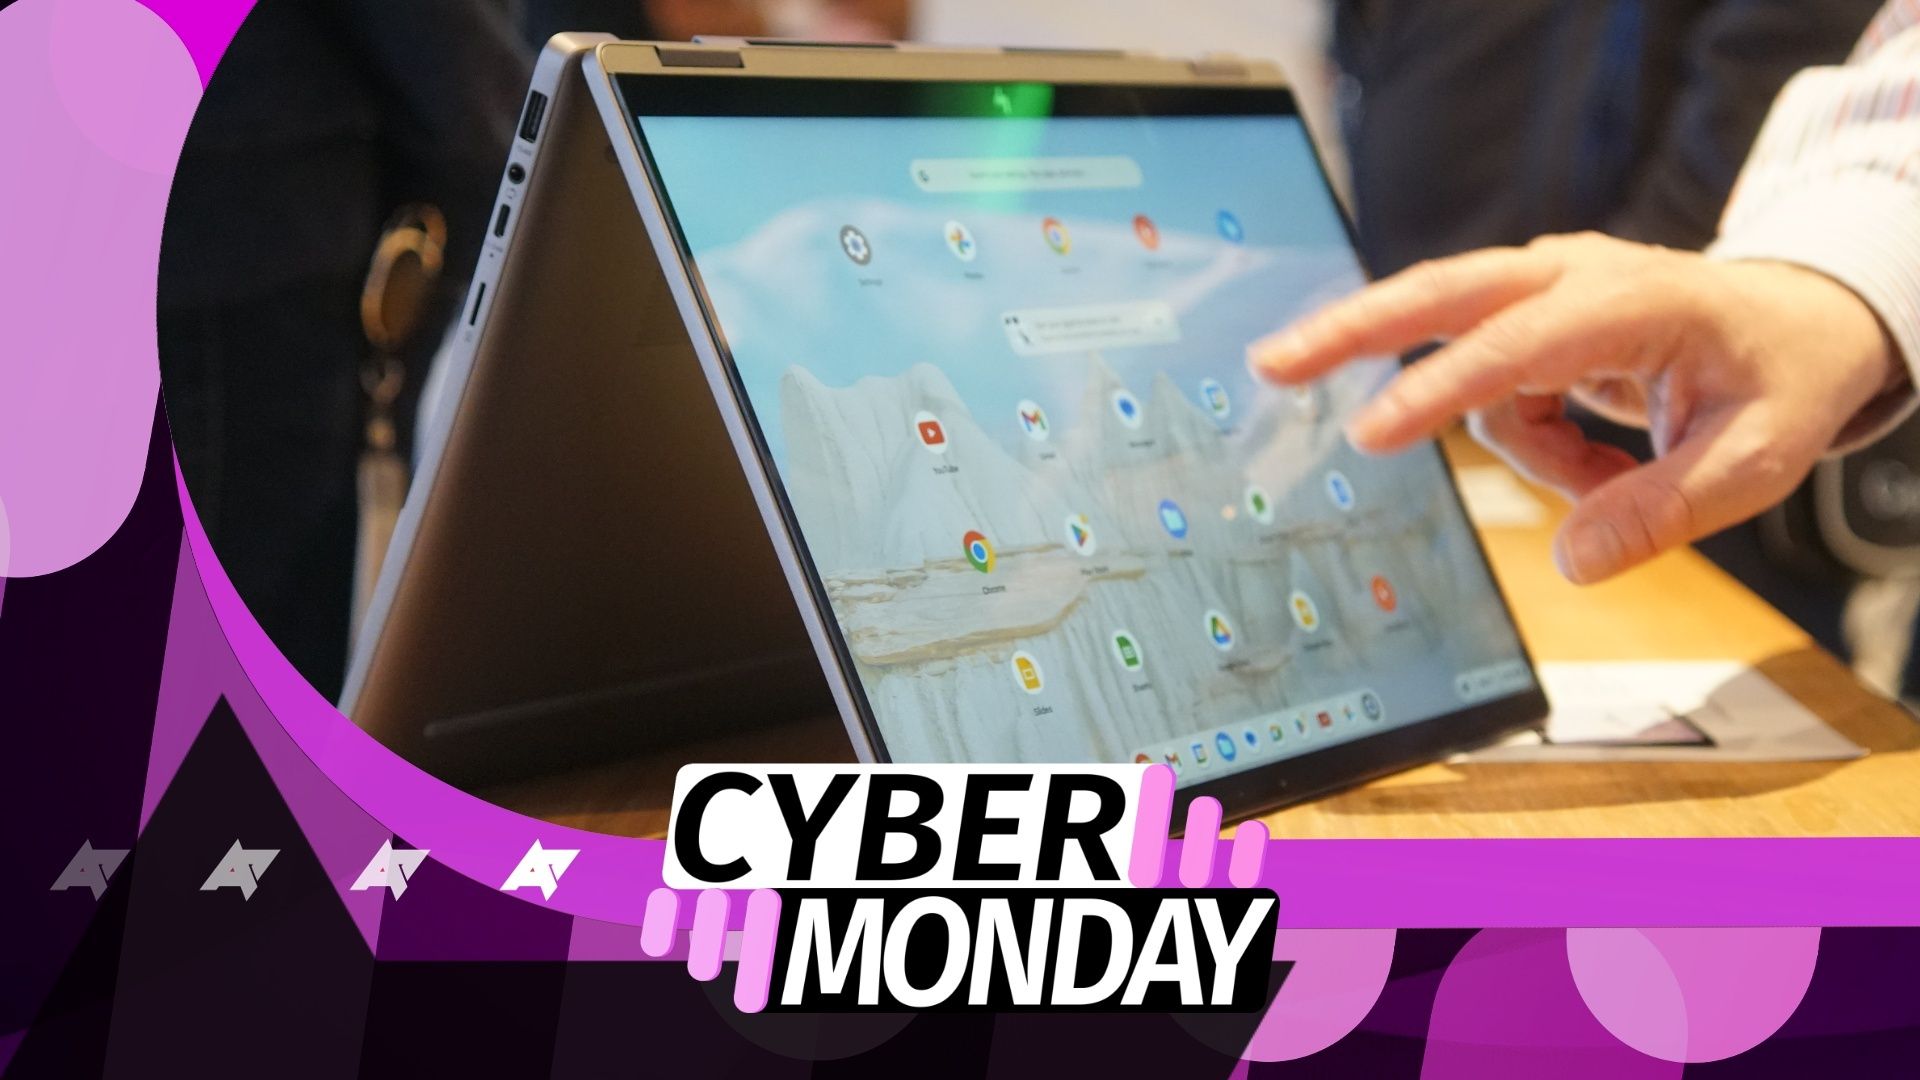 A photo of a Chromebook flipped open with a Cyber Monday banner logo overlaid